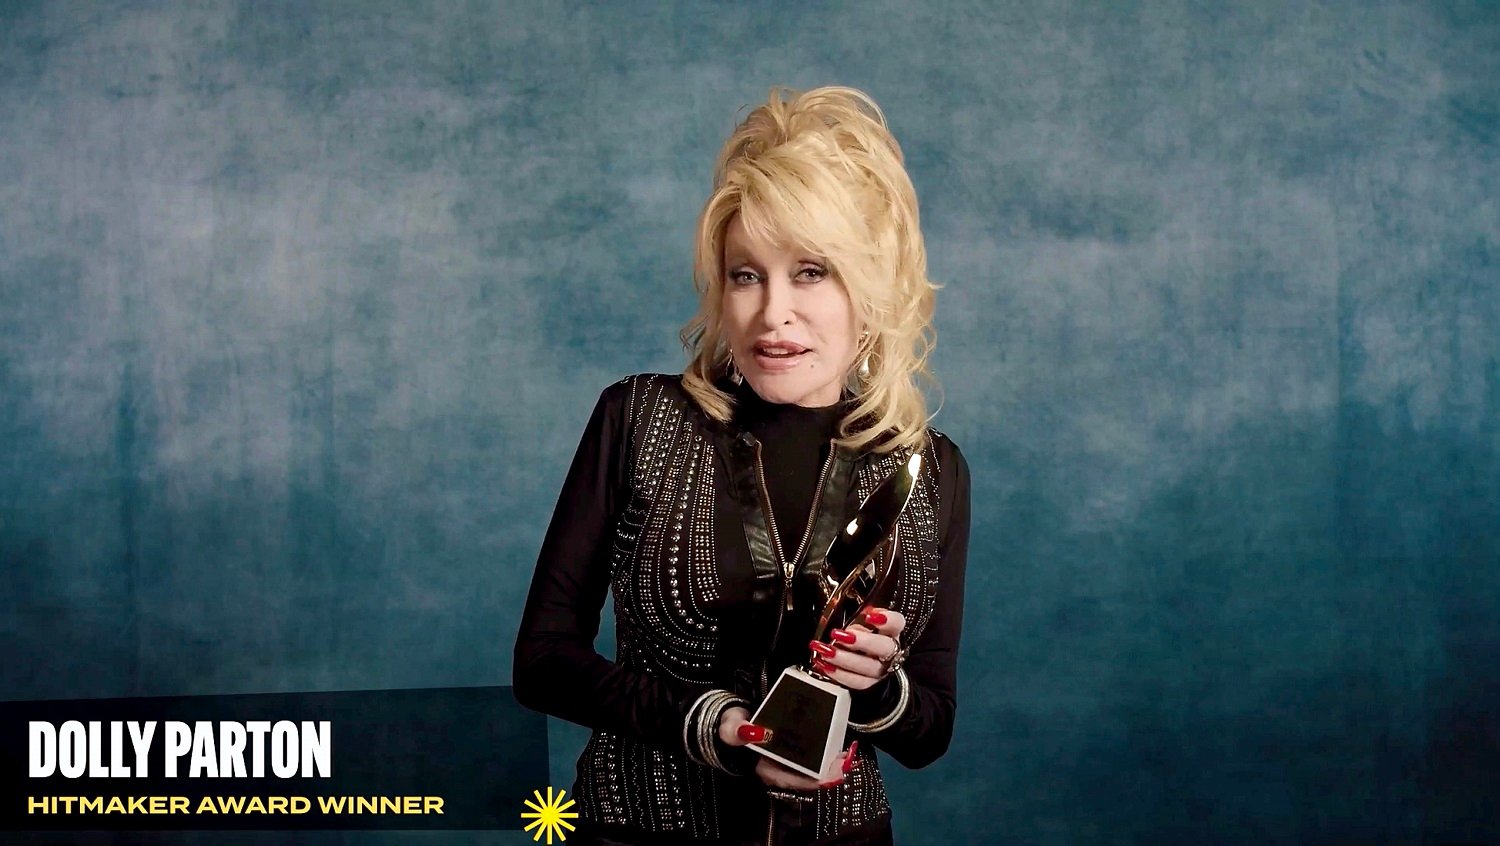 Dolly Parton accepts the Hitmaker Award during the Billboard Women In Music 2020 event on December 10, 2020.